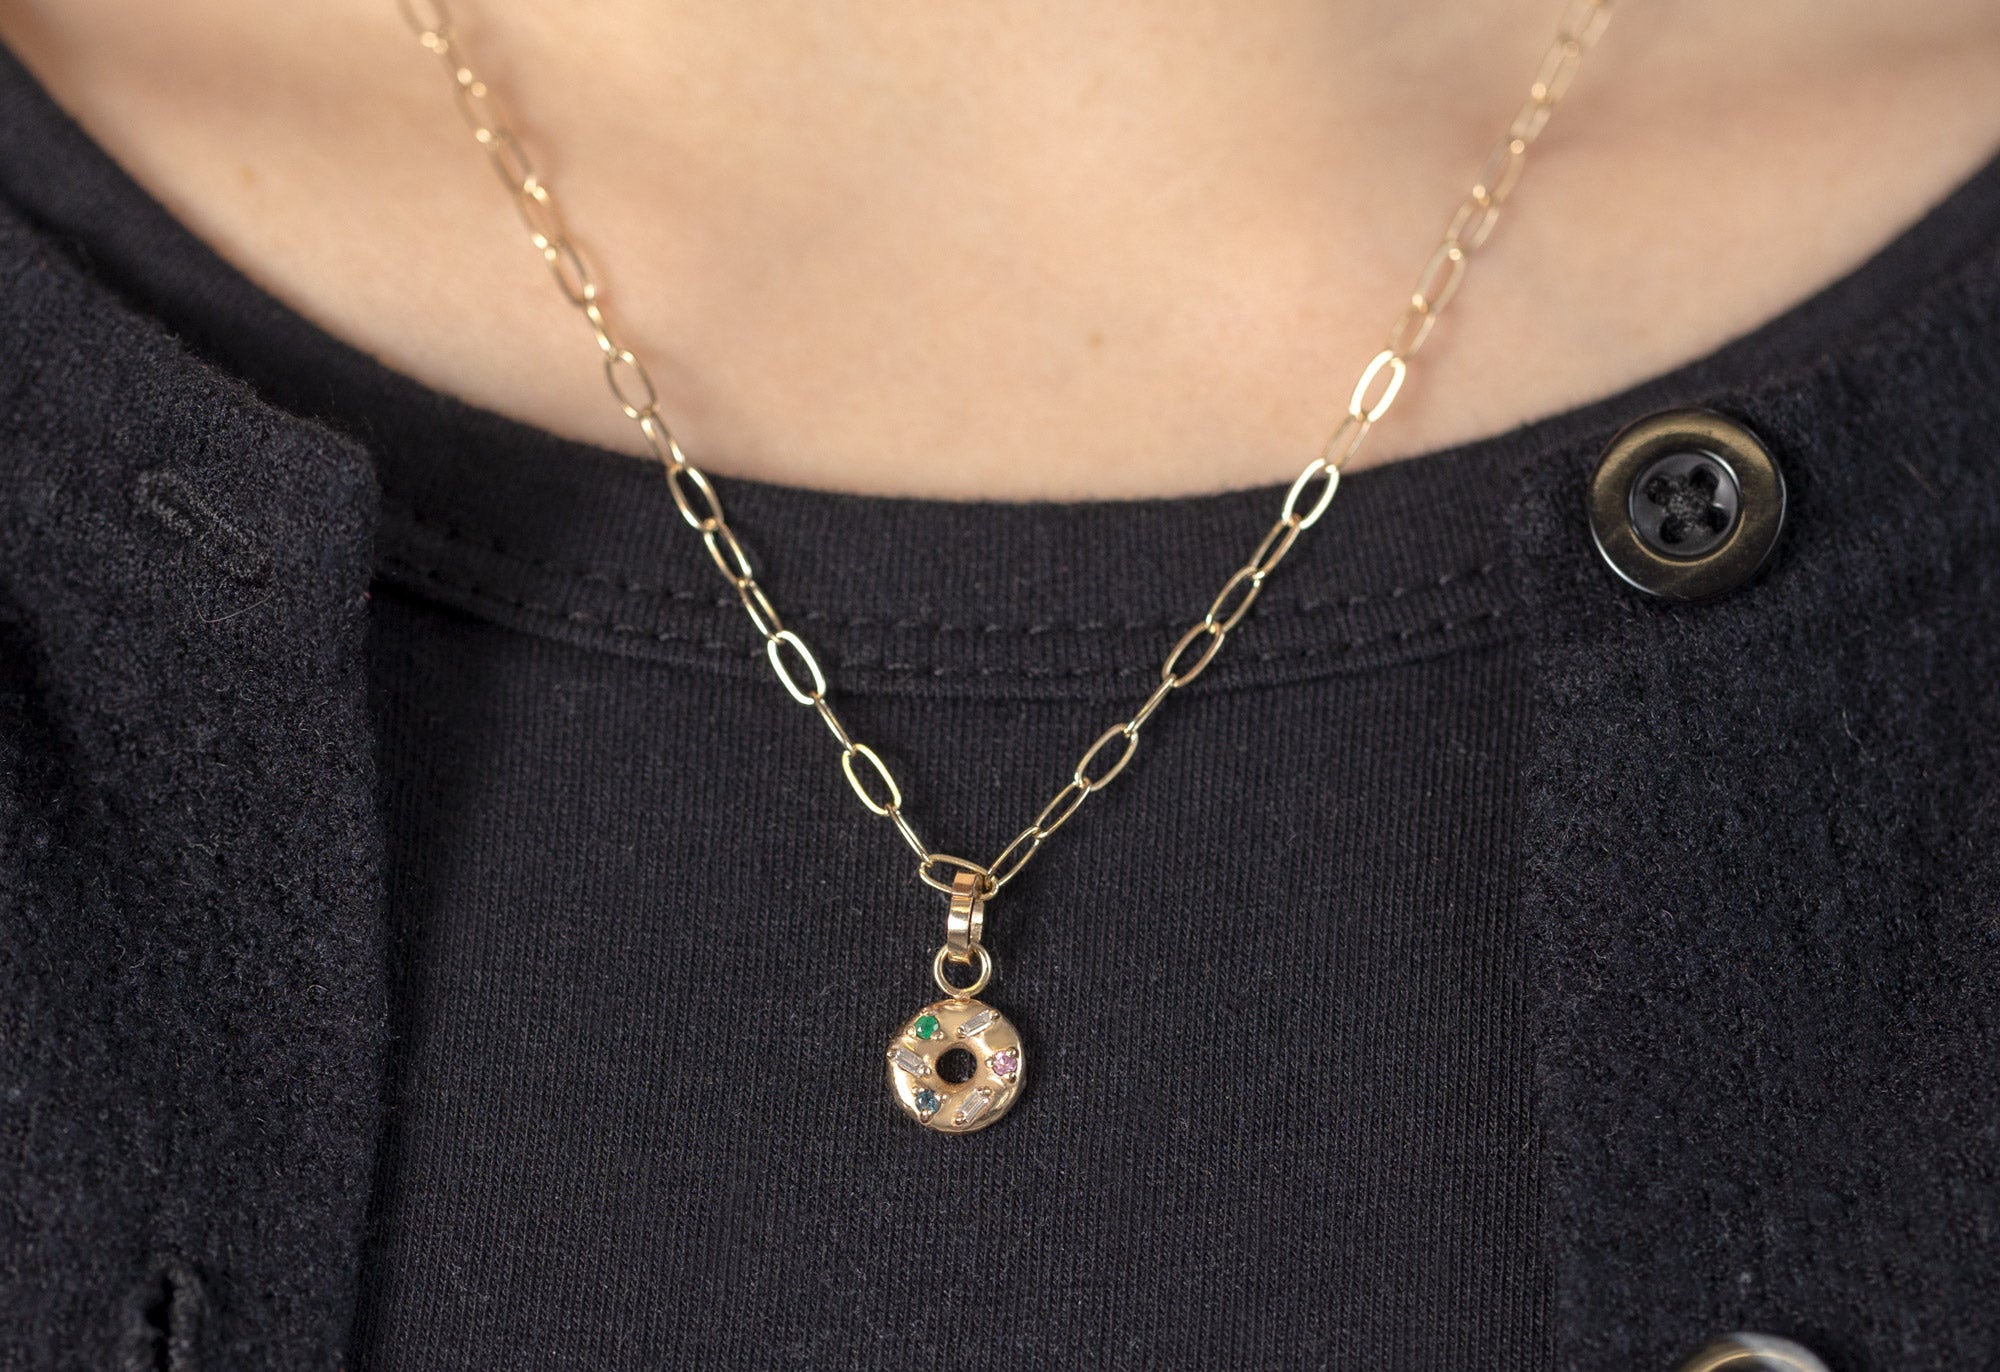 The Drawn Cable Chain Charm Necklace